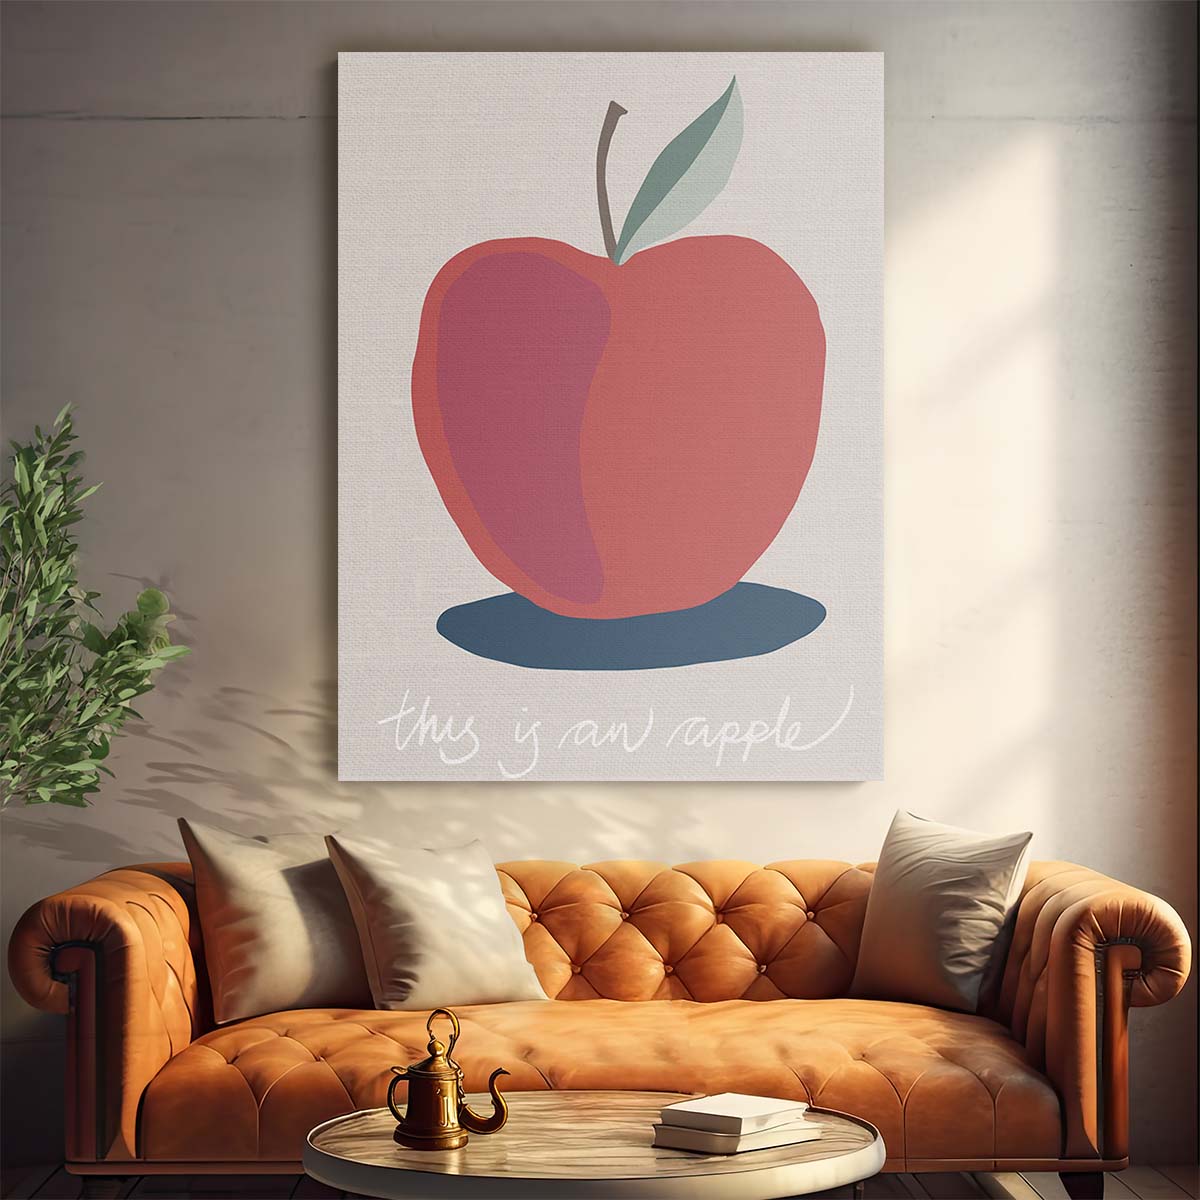 Mid-Century Apple Illustration Wall Art for Kitchen by Luxuriance Designs, made in USA